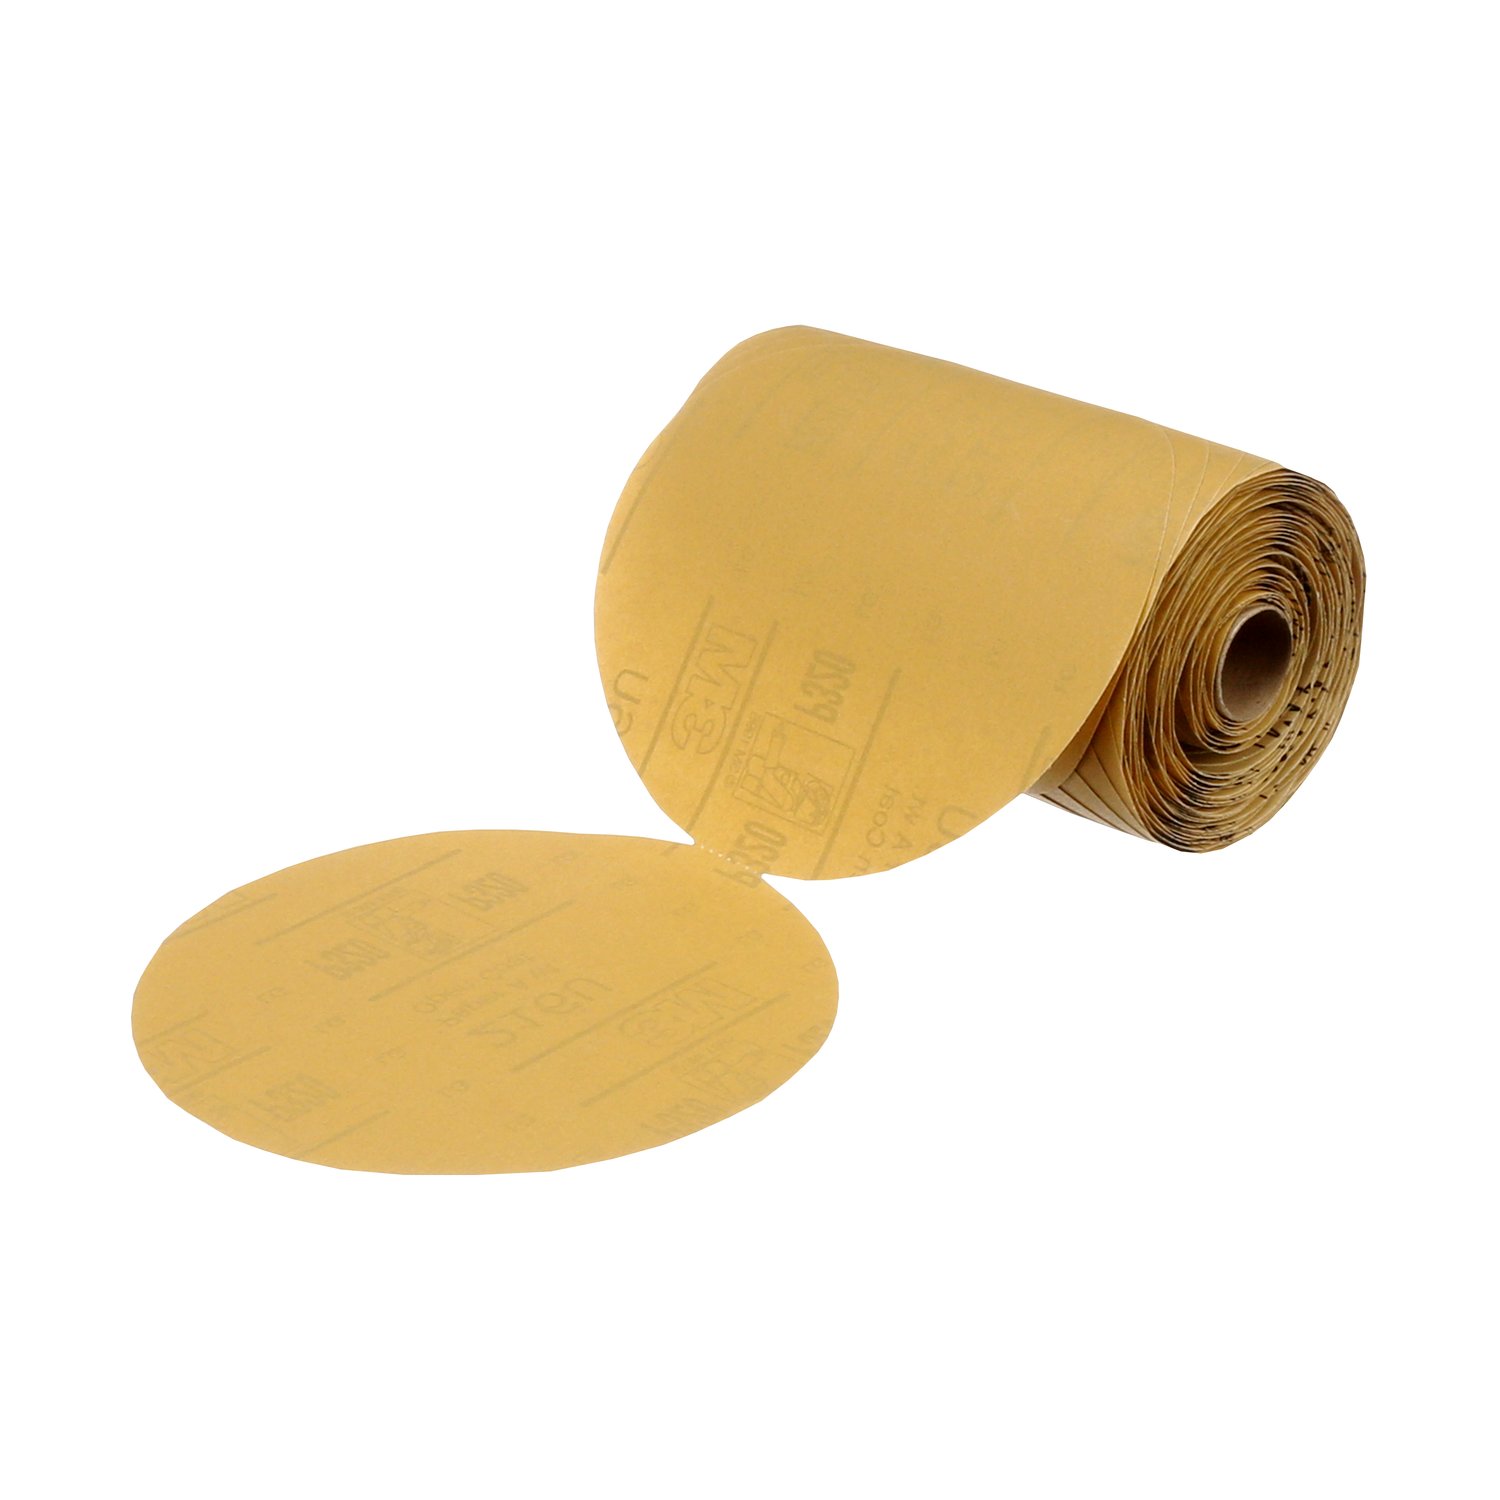 7100109515 - 3M Stikit Gold Paper Disc Roll 216U, P80 A-weight, Config